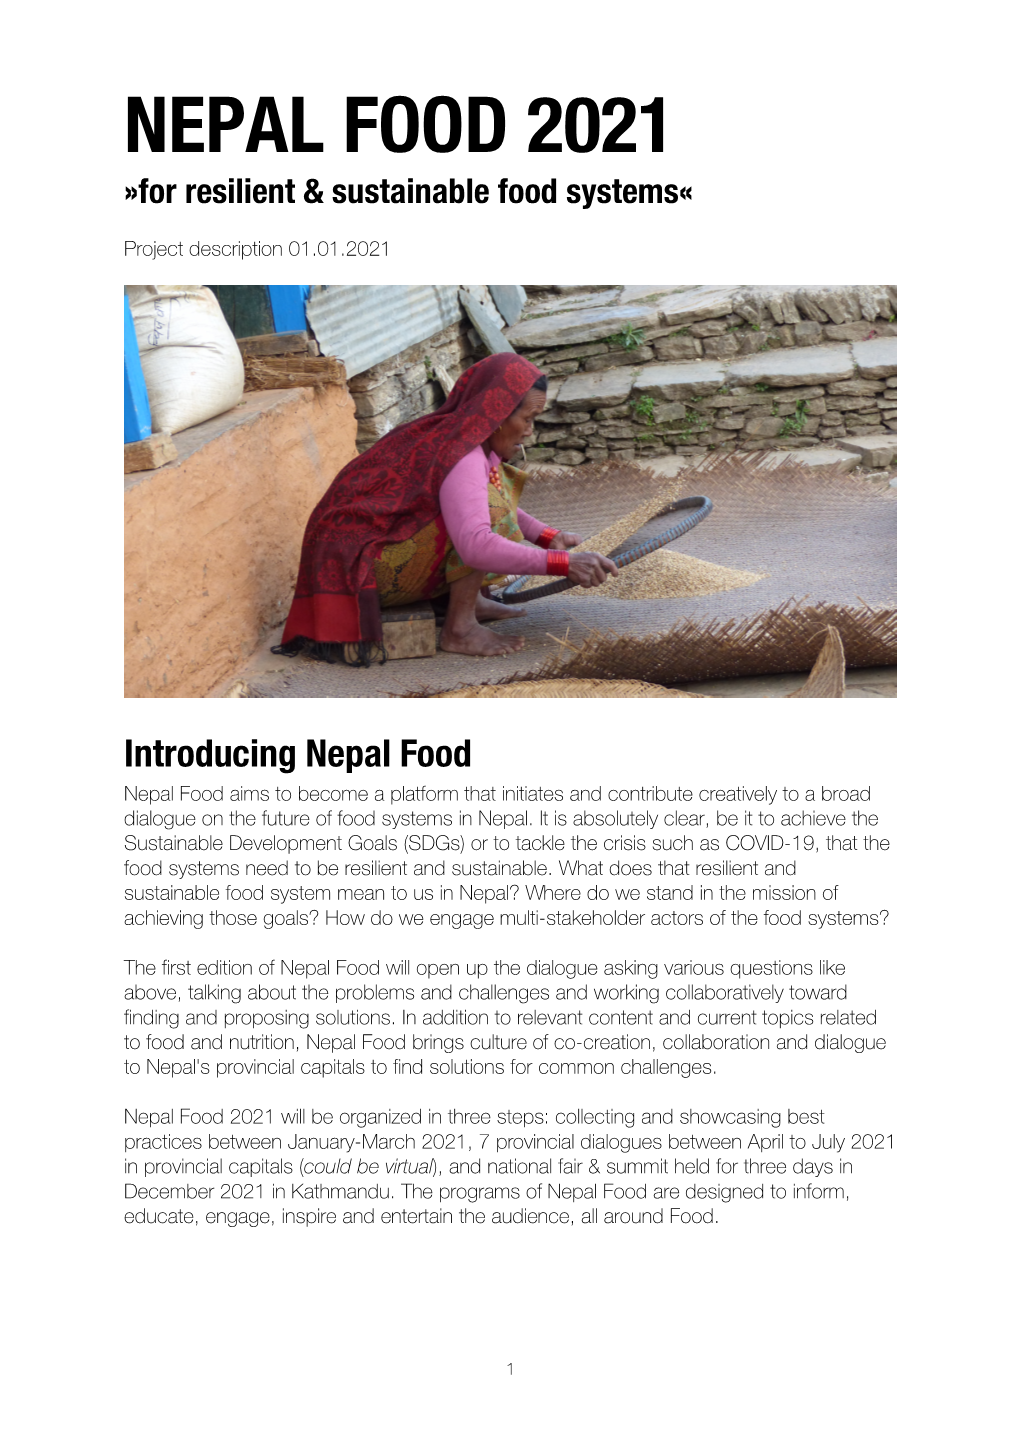 NEPAL FOOD 2021 »For Resilient & Sustainable Food Systems«